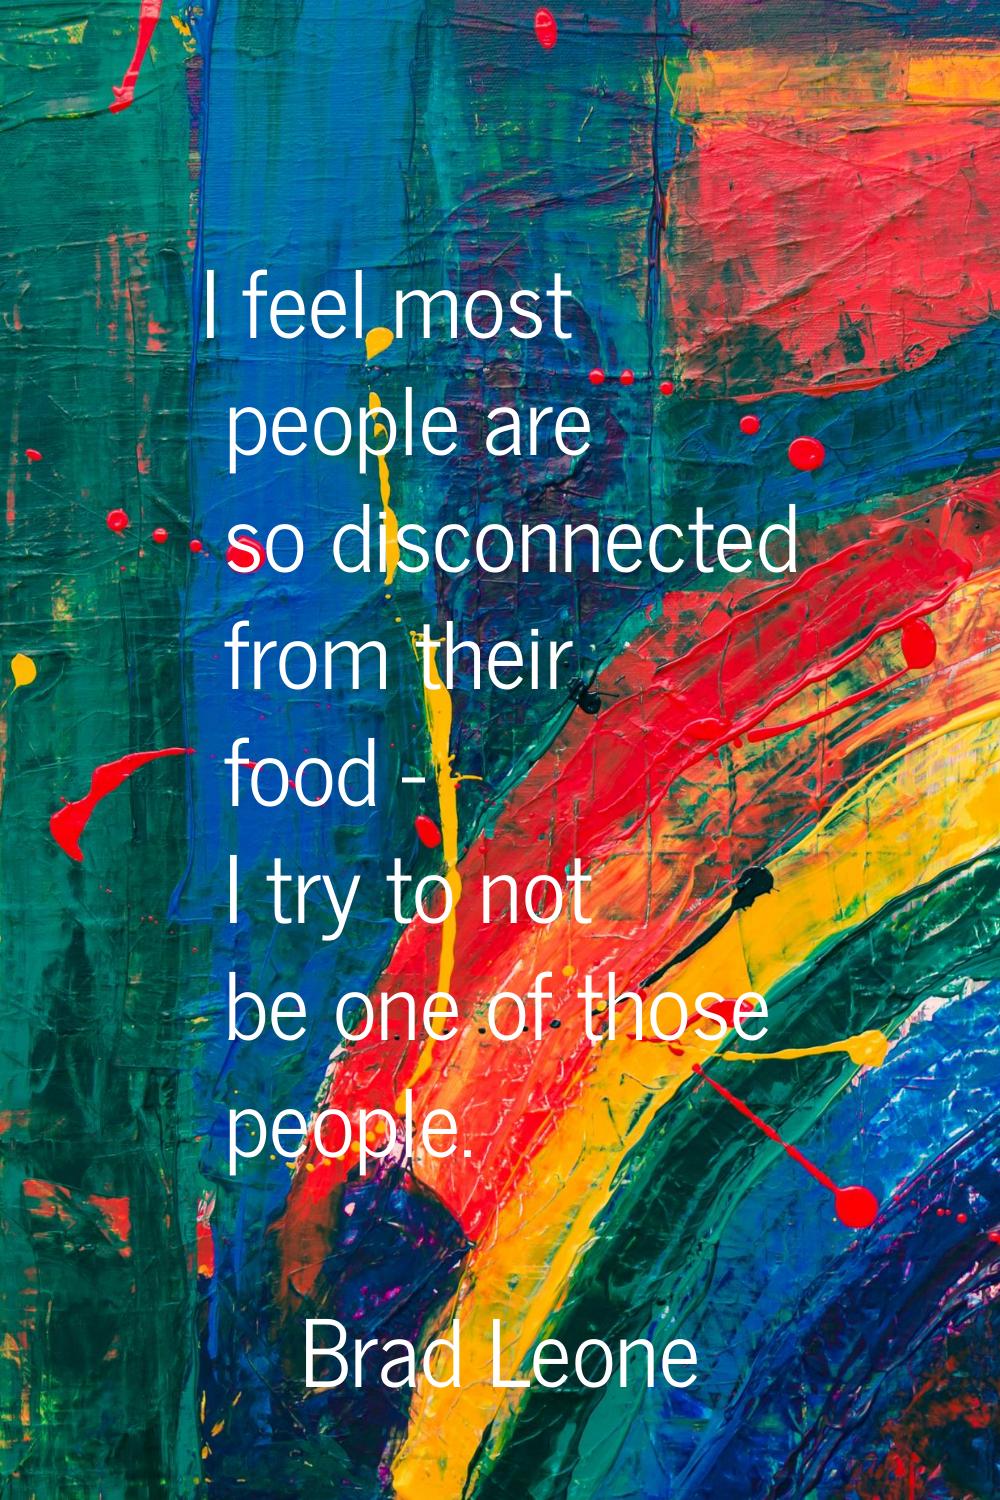 I feel most people are so disconnected from their food - I try to not be one of those people.